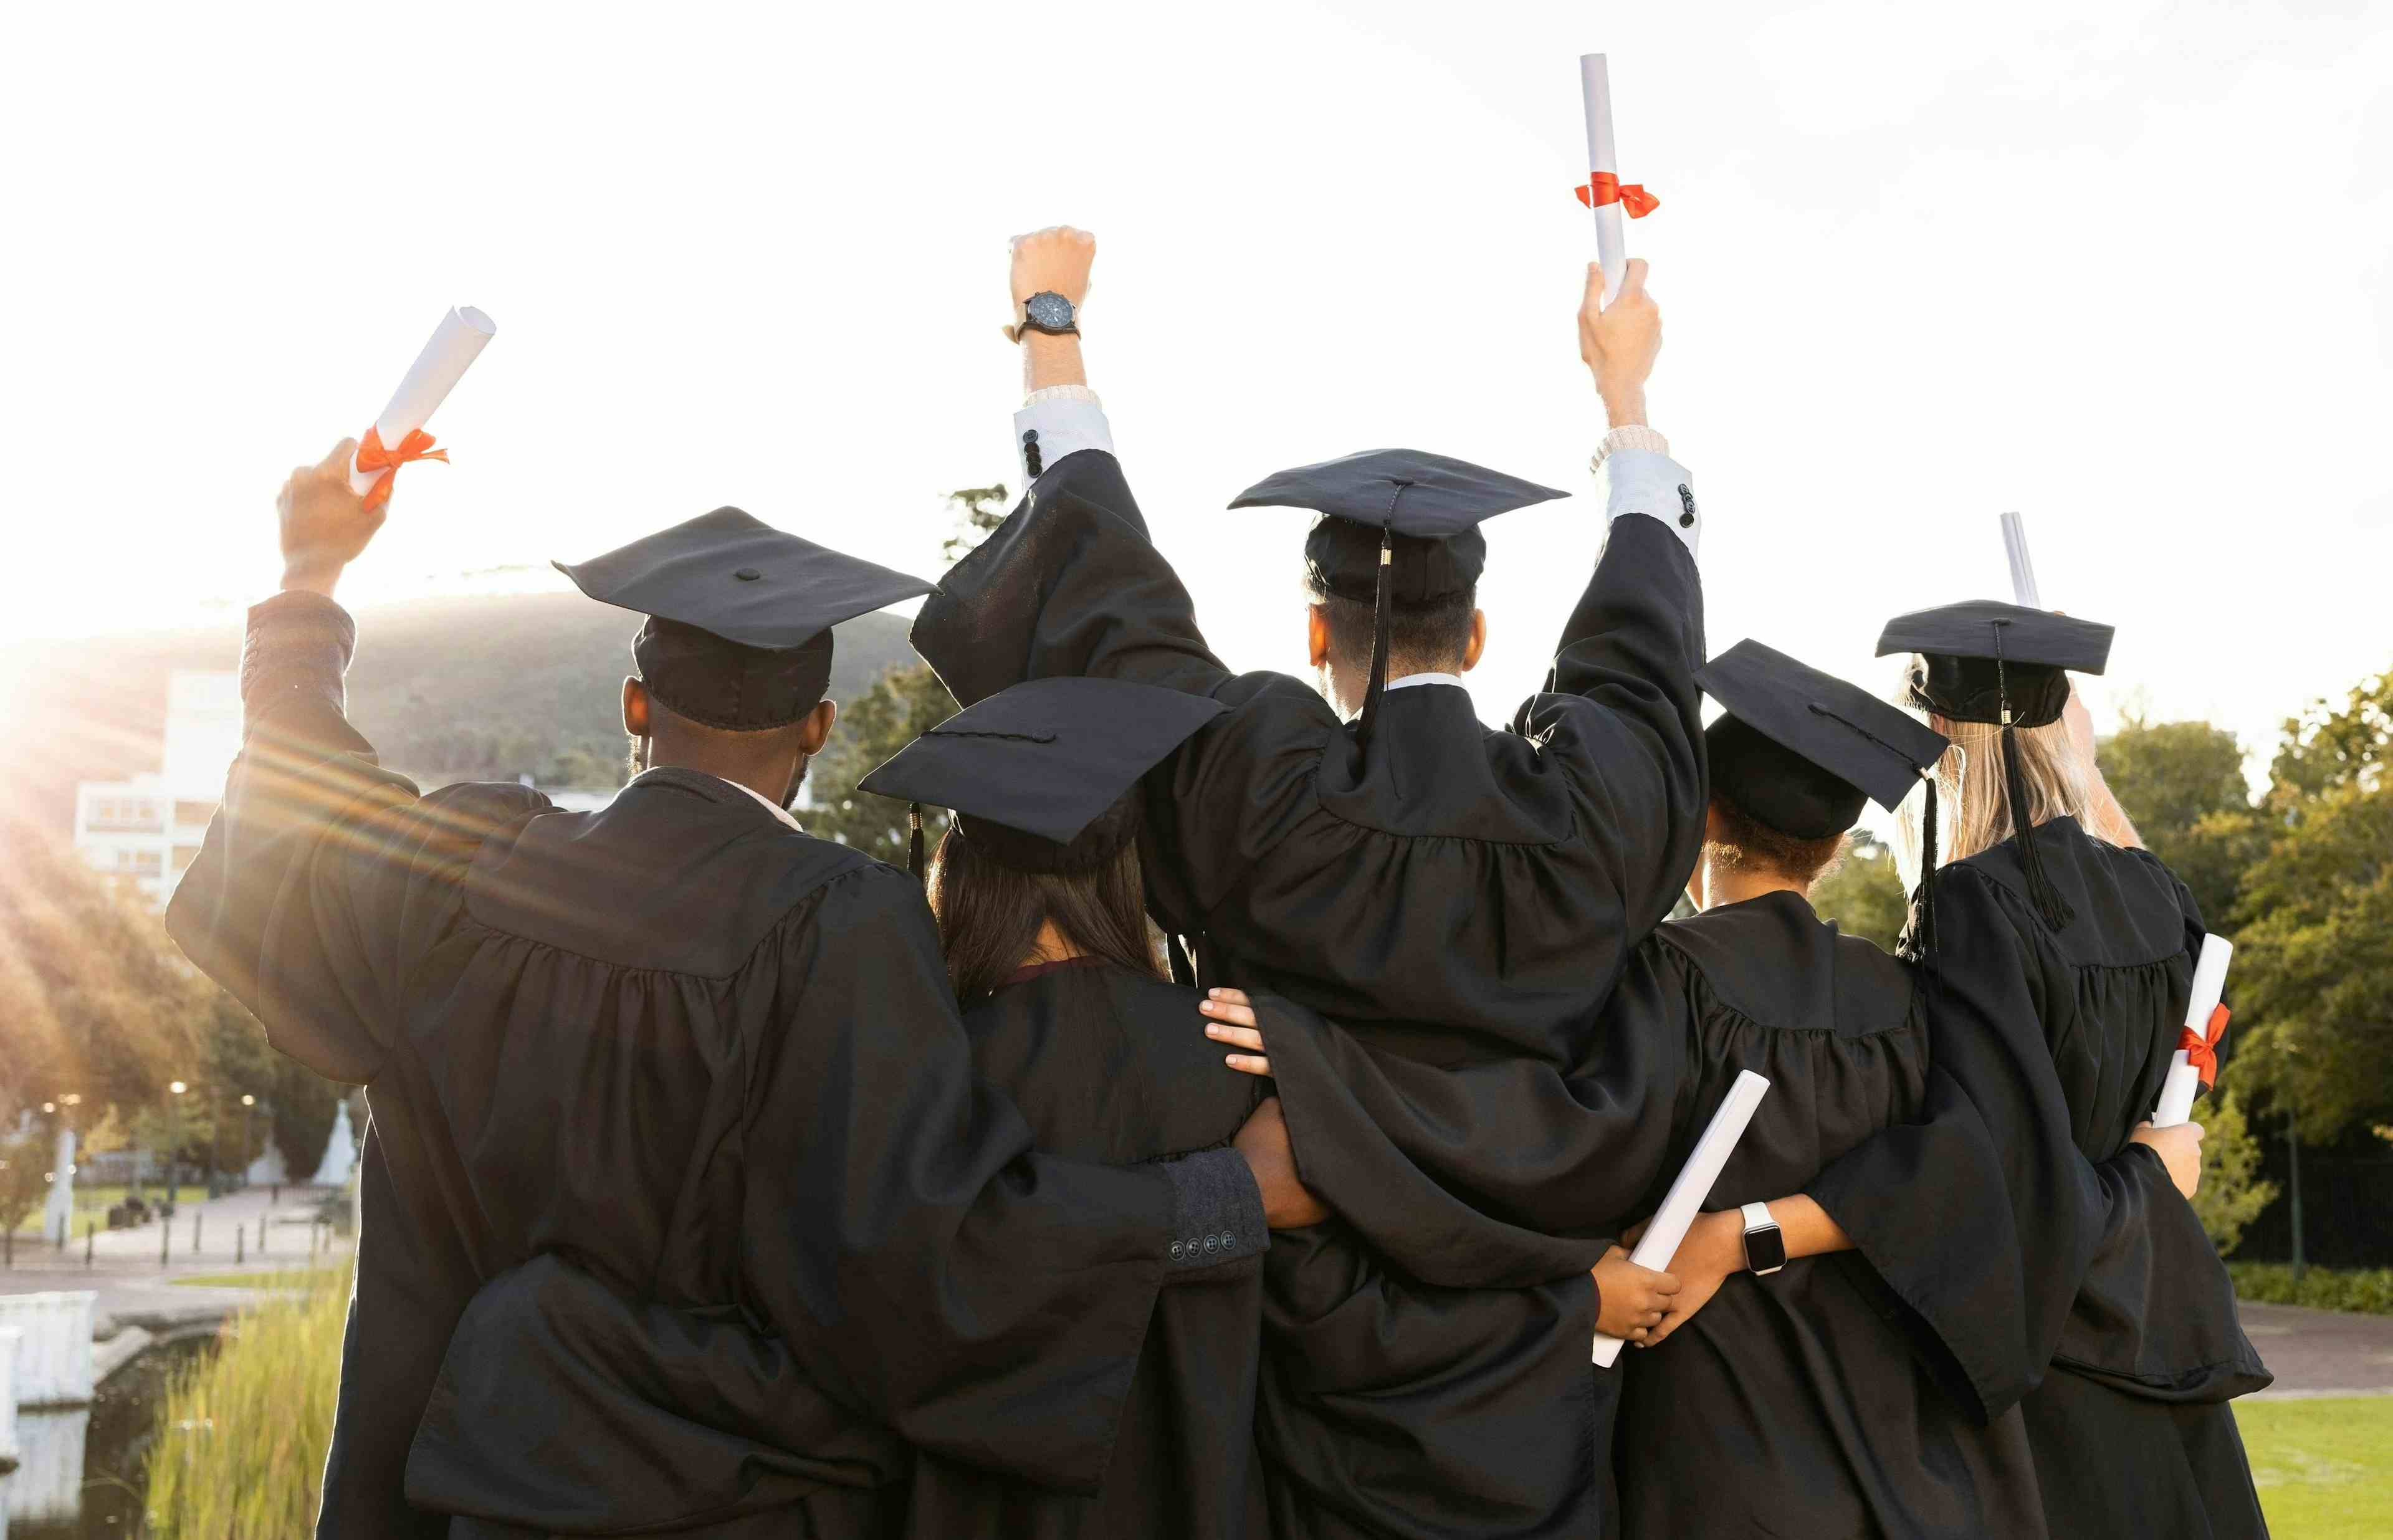 High School students in their graduation attire holding diplomas with their backs towards the camera